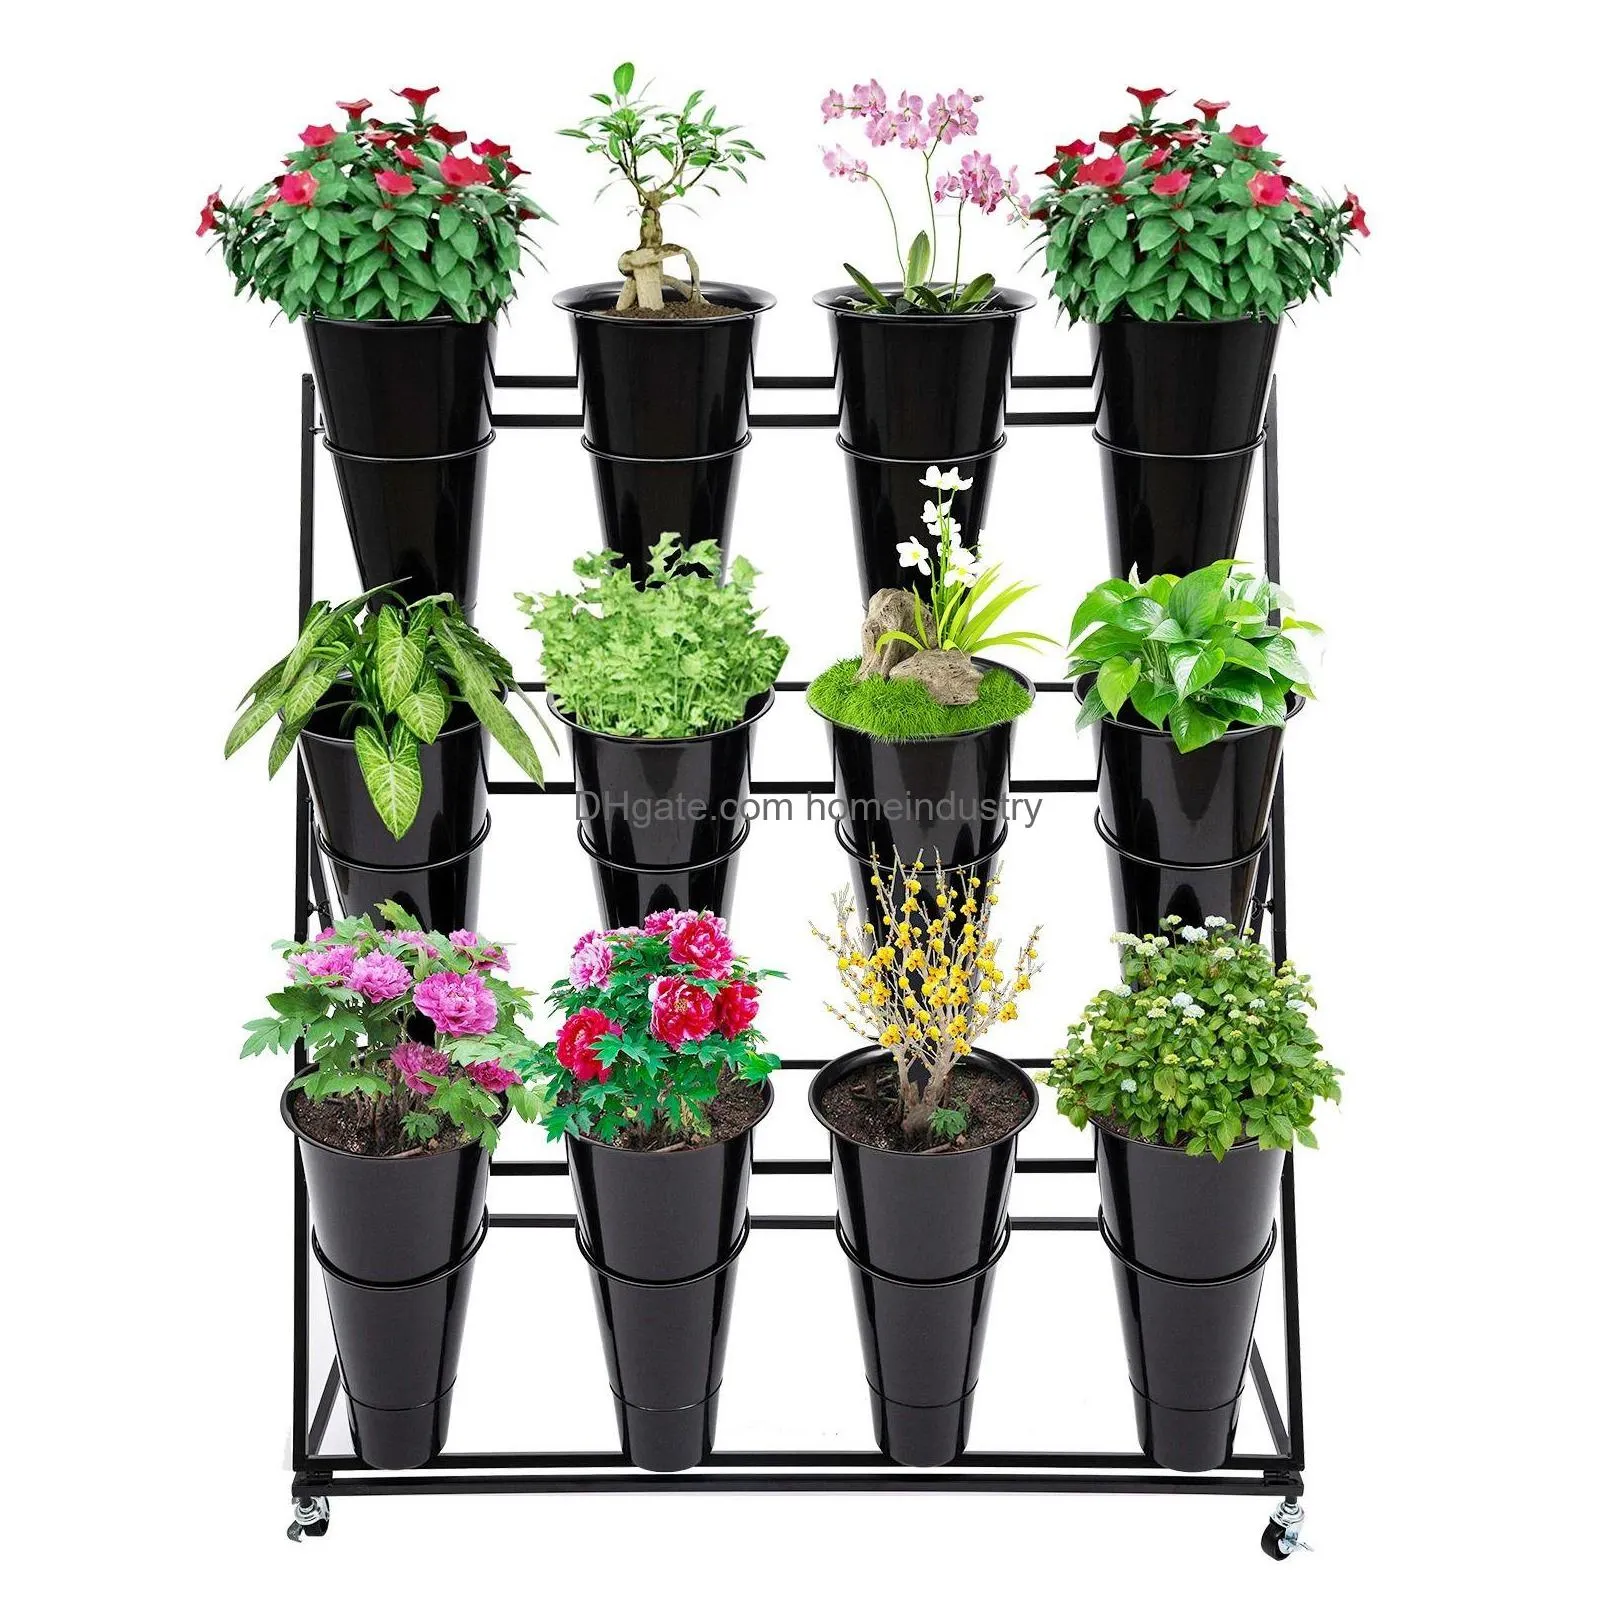 Storage Holders & Racks Black Flower Display Stand 12 X Buckets 3 Layers Metal Plant With Wheels 240109 Drop Delivery Home Garden Hous Dh7Jd